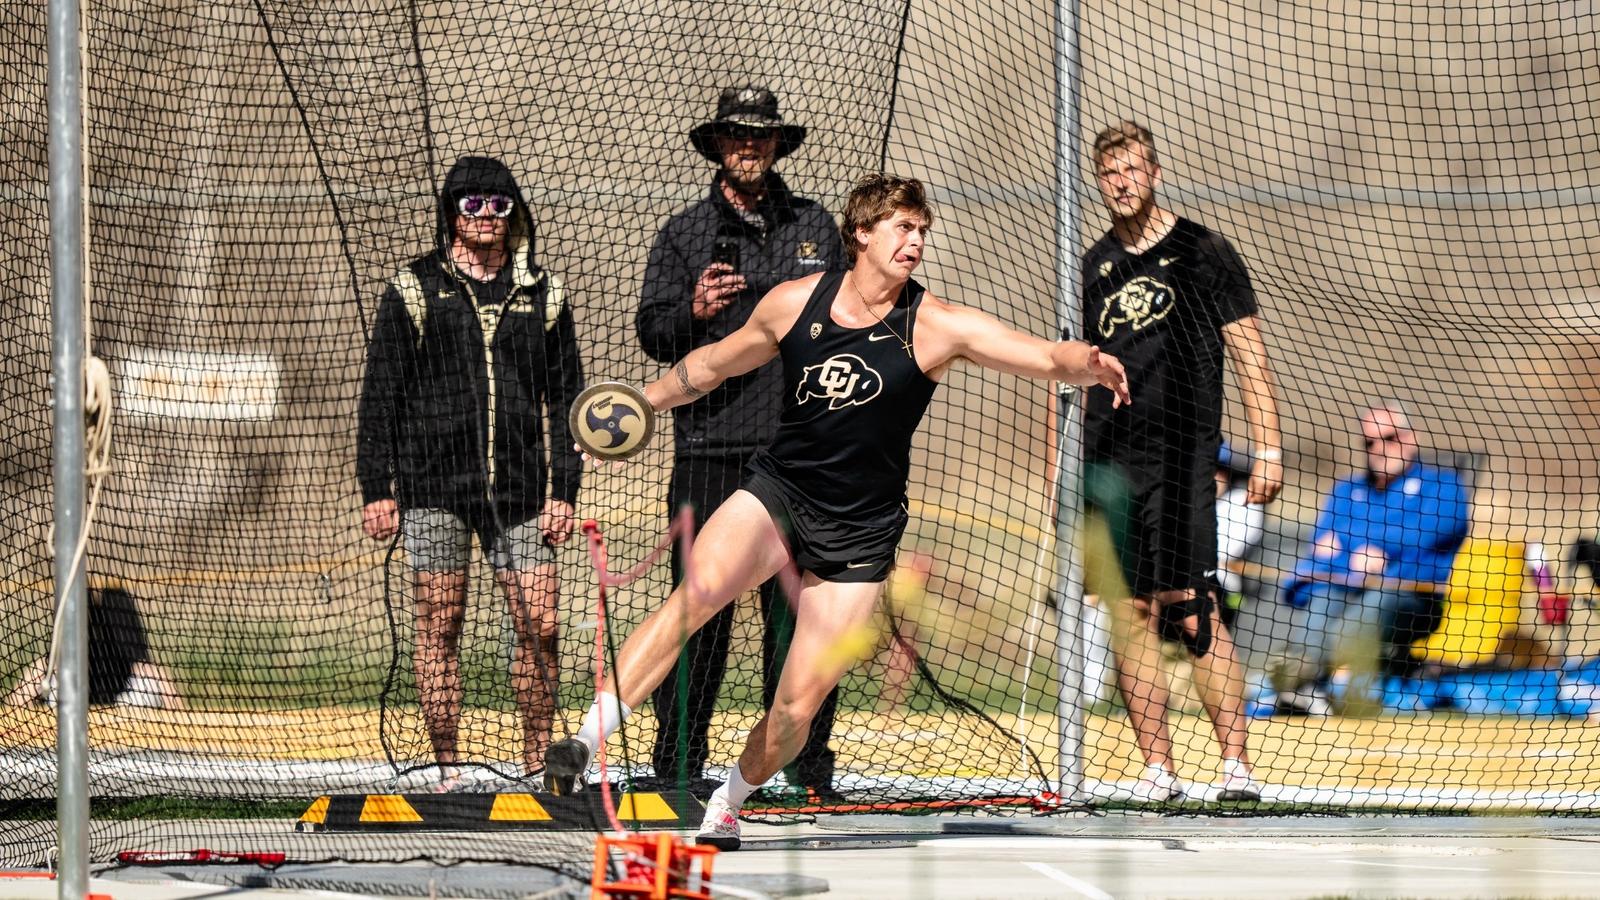 Colorado Throwers to Highlight Air Force Twilight Open